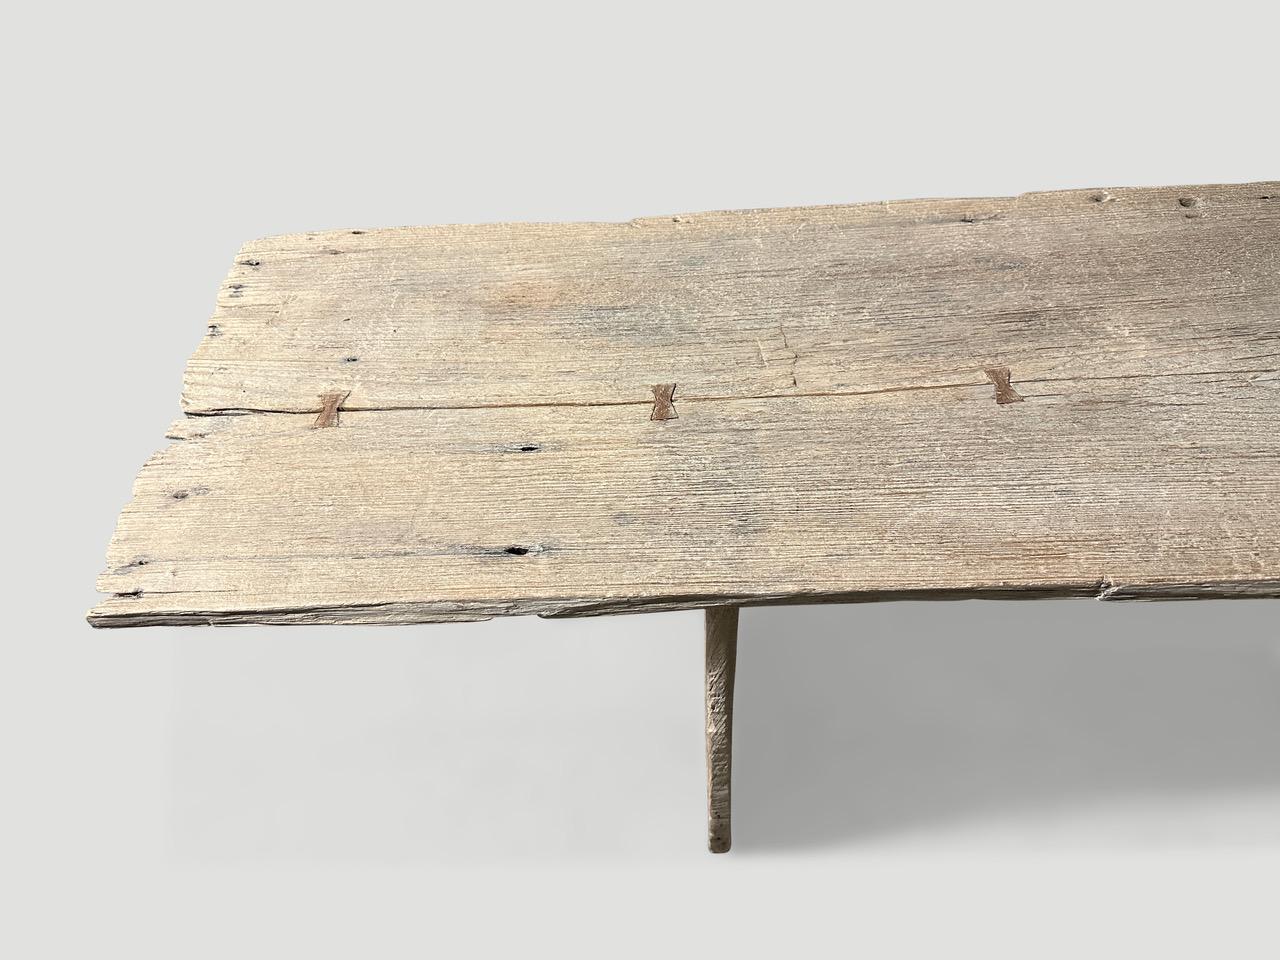 Impressive single slab live edge bleached teak console table with butterfly detail. We added our white wash secret ingredient revealing the beautiful grain on this reclaimed teak wood. The top rests on minimalist teak panels. It’s all in the